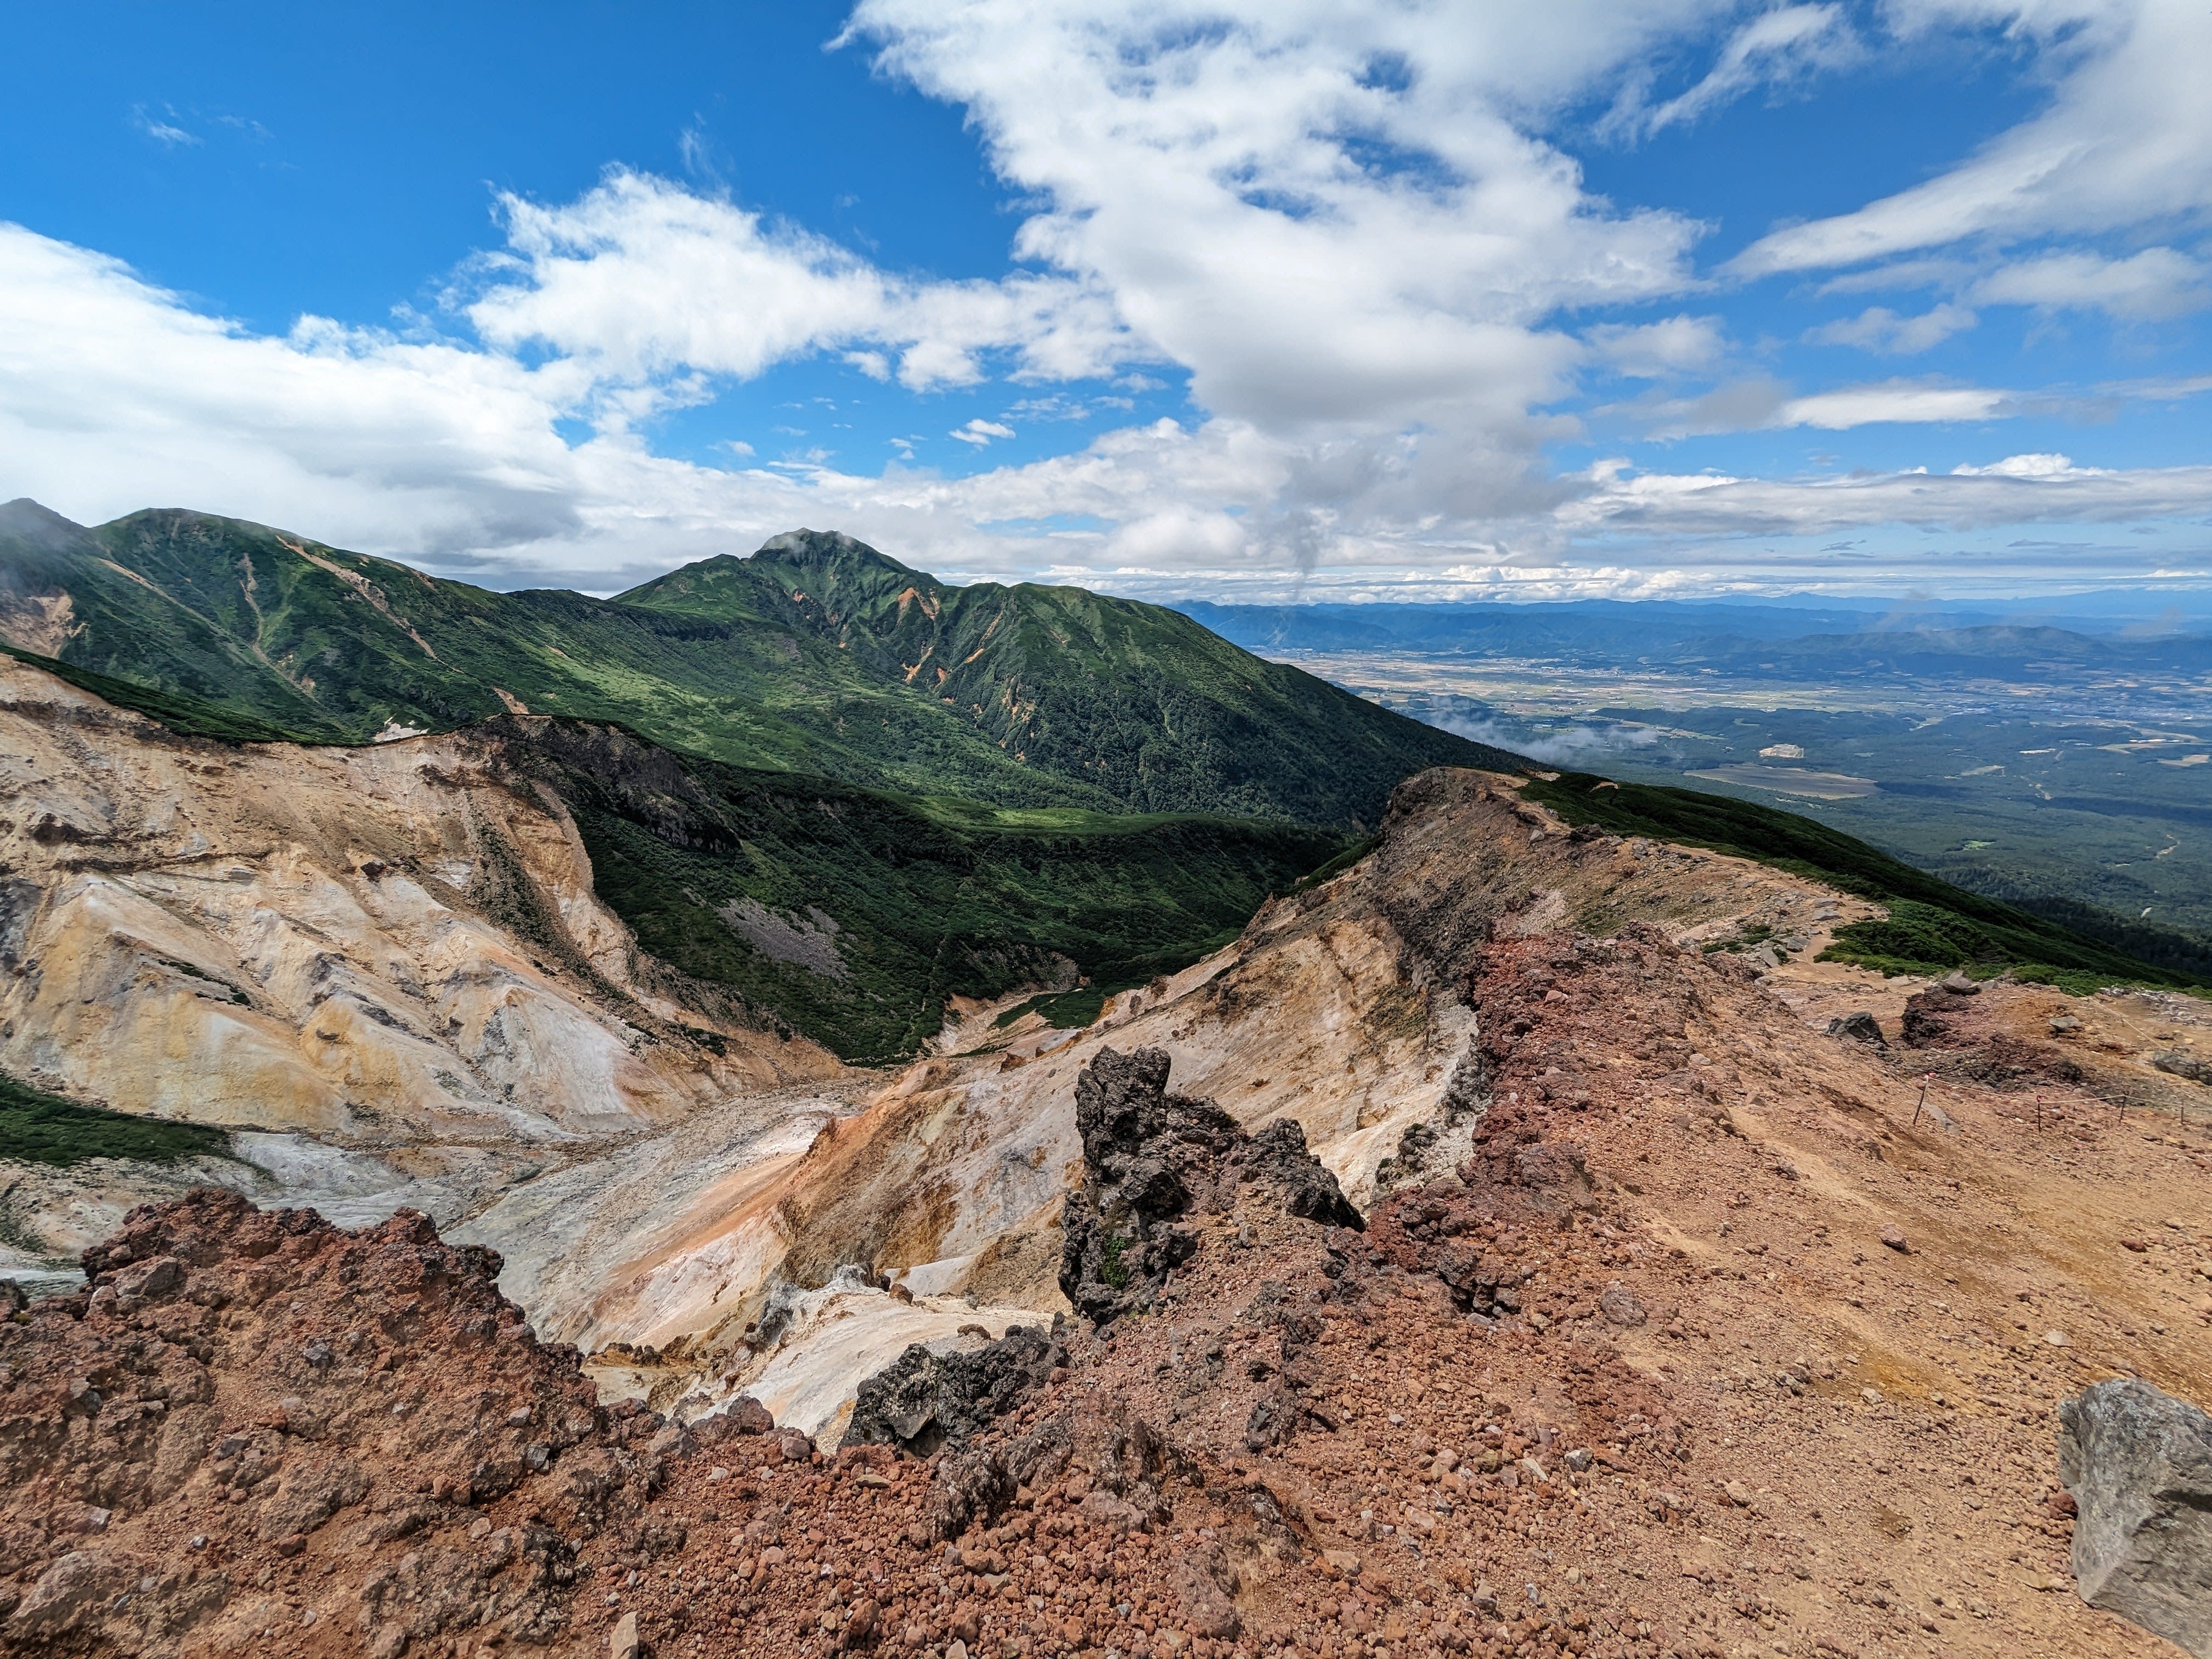 A green Mt. Furano is seen standing over the Furano plains. The photo is taken from Mt Sandan and looks out over the rocky landscape of Ansei Crater. The foreground ridge is also rocky, showing the volcanic nature of Daisetsuzan National Park.